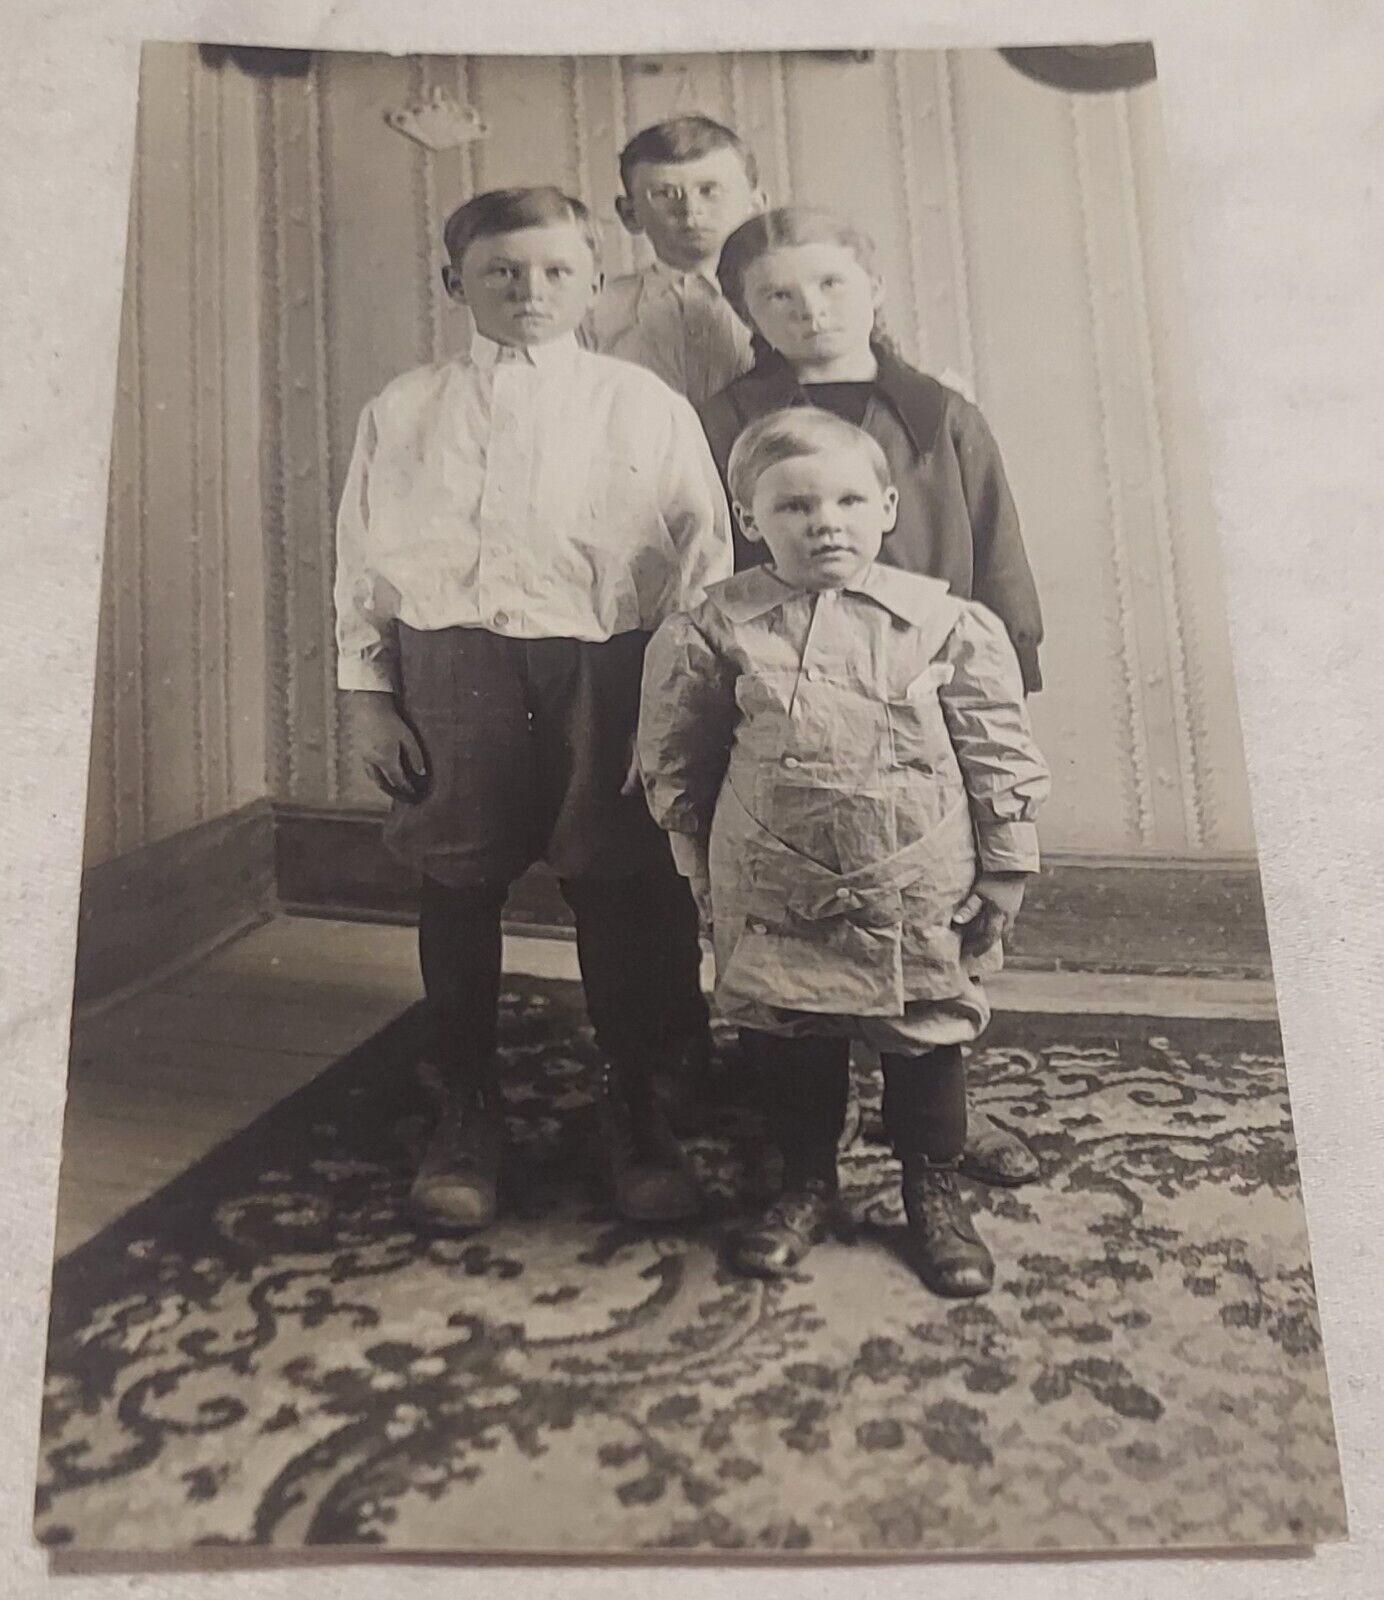 Antique Vintage RPPC Real Photo Post Card Black & White Children Siblings Family